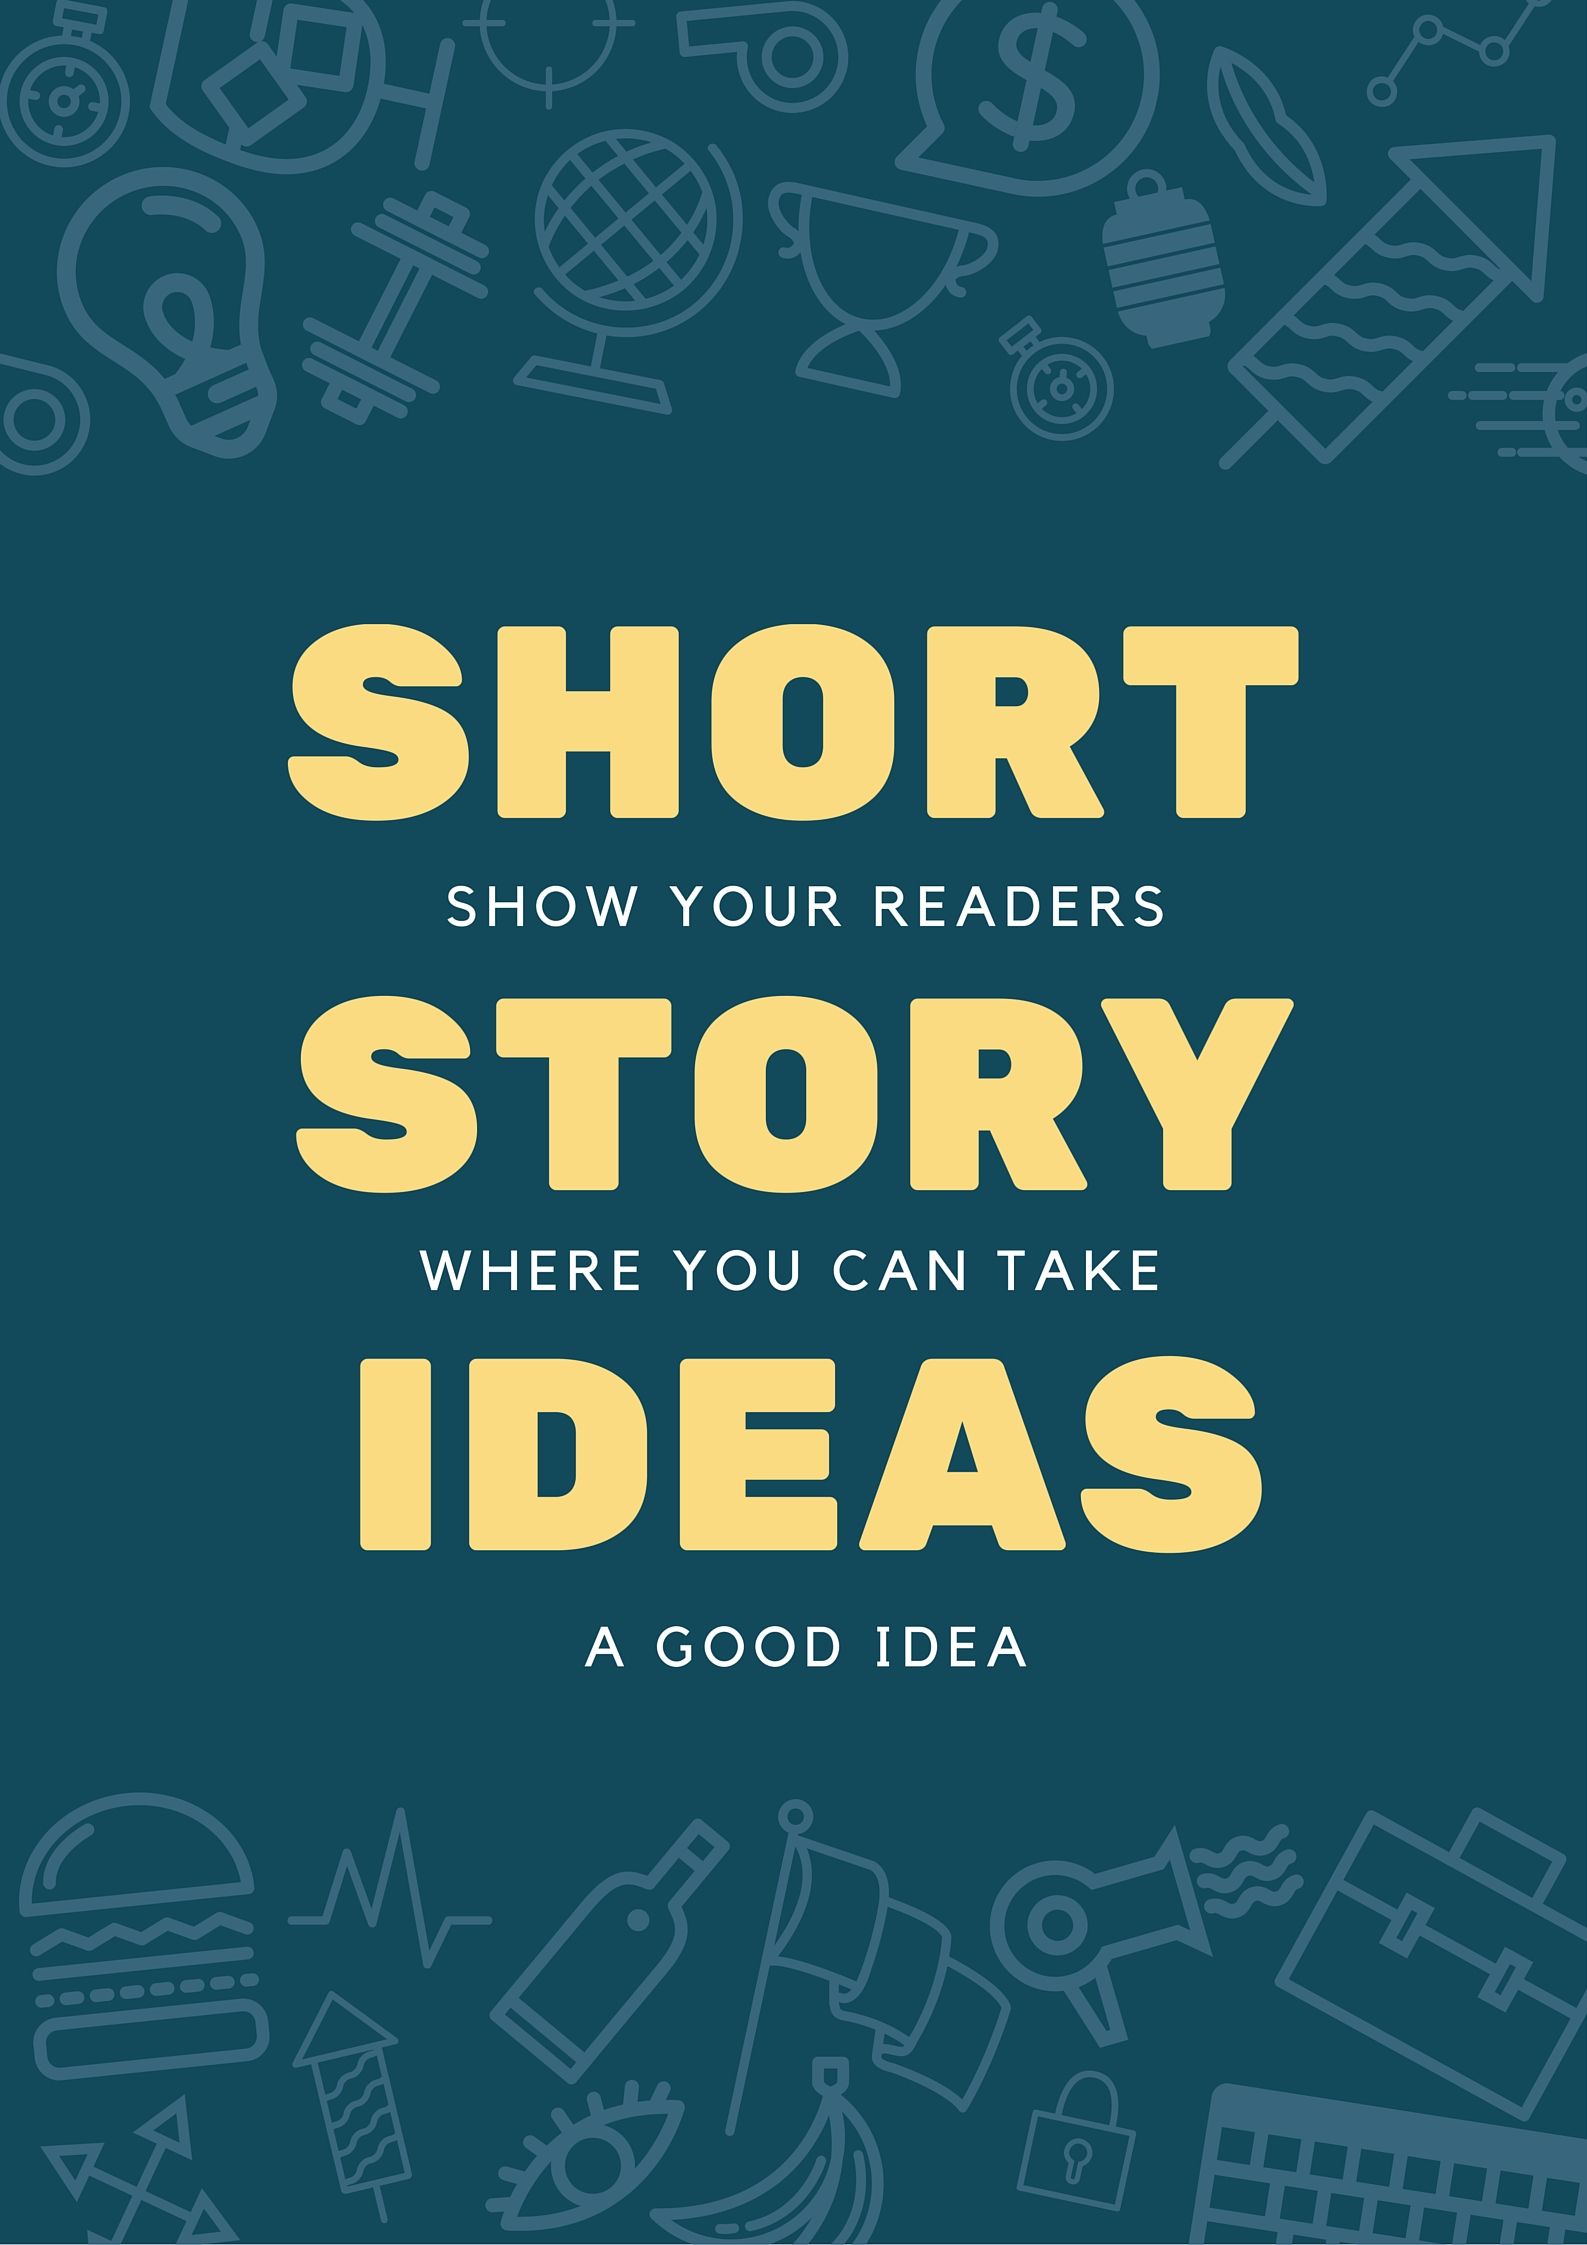 72 Short Story Ideas To Supercharge Your Writing - Bookfox